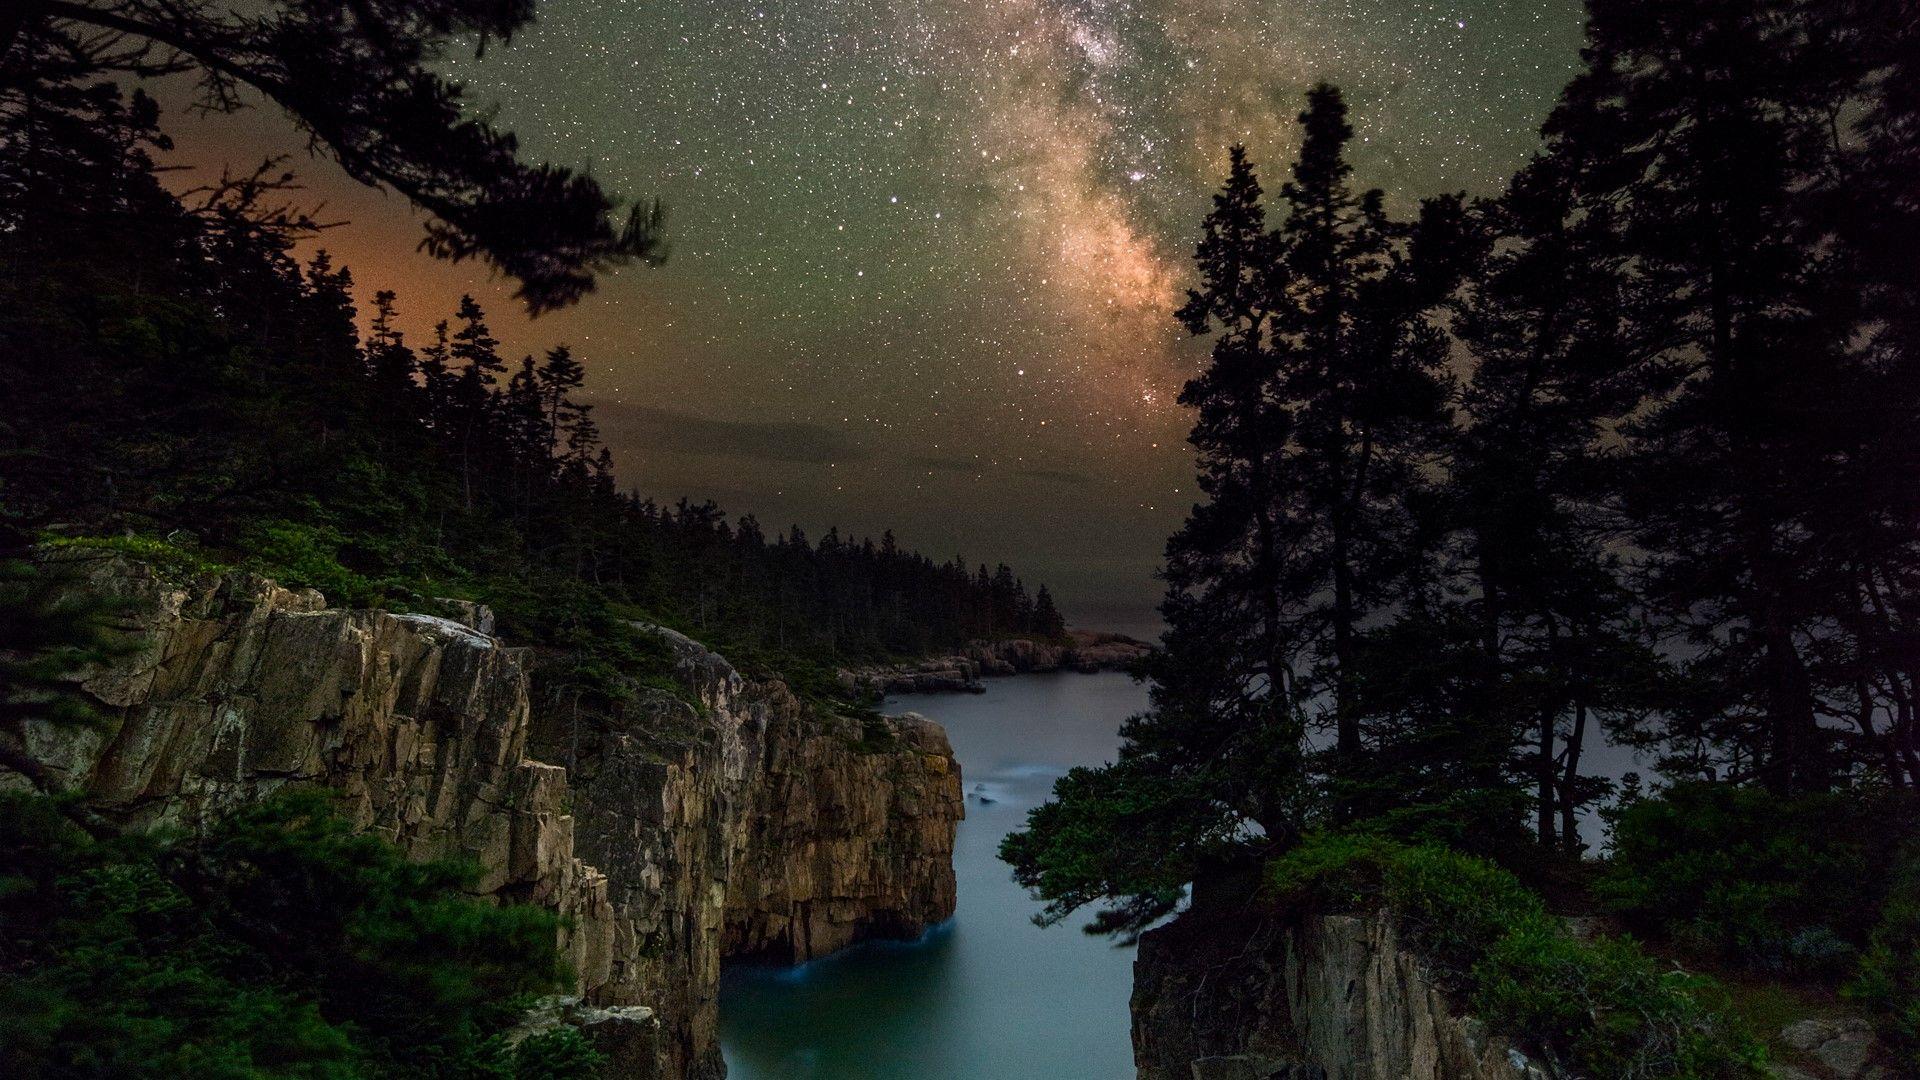 Milky Way as seen from Acadia National Park, Maine